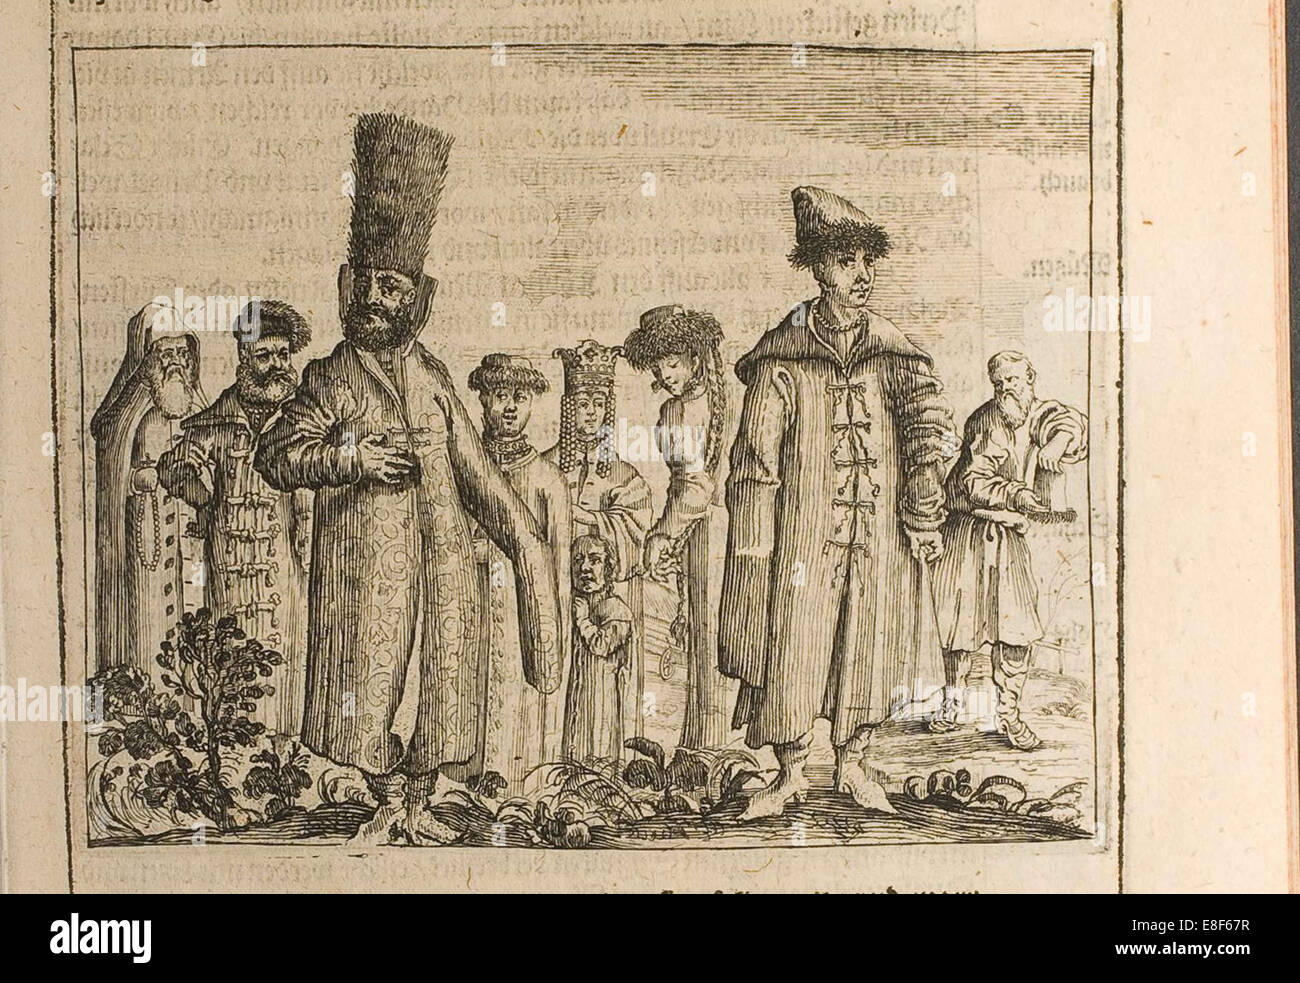 Traditional dress of Moscovites (Illustration from Travels to the Great Duke of Muscovy and the Kin Artist: Rothgiesser, Christian Lorenzen (?-1659) Stock Photo